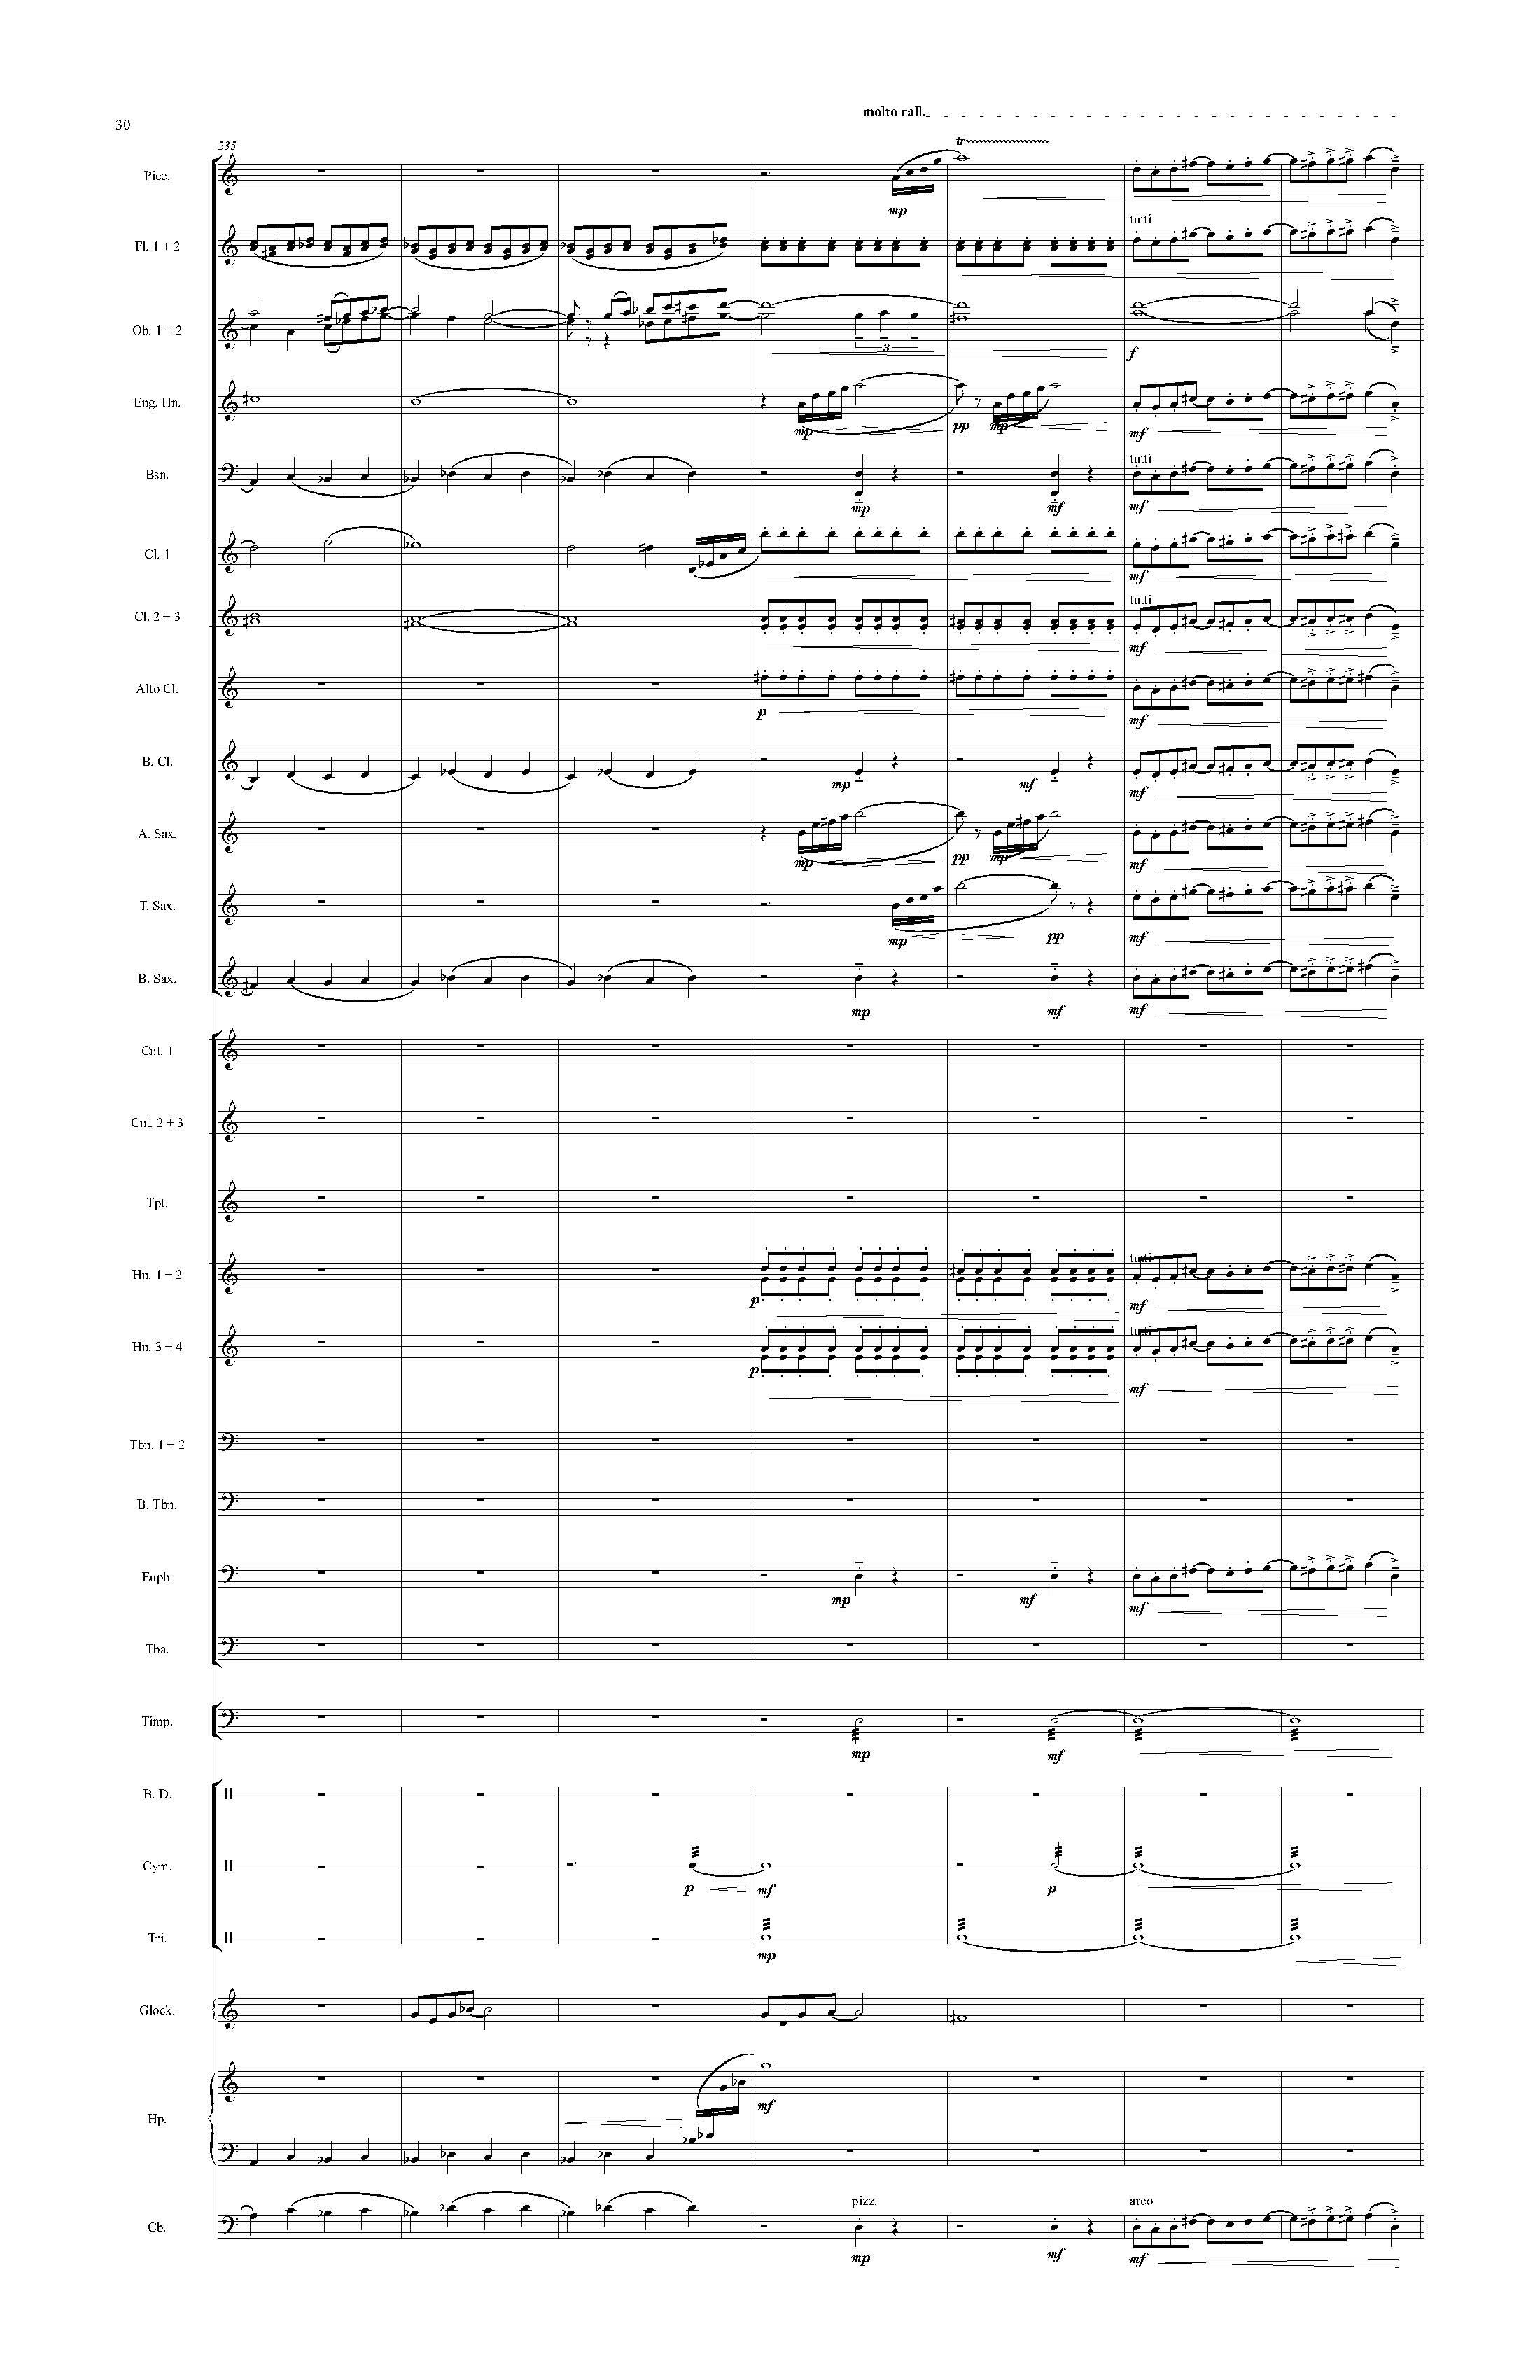 Psyche - Complete Score_Page_36.jpg